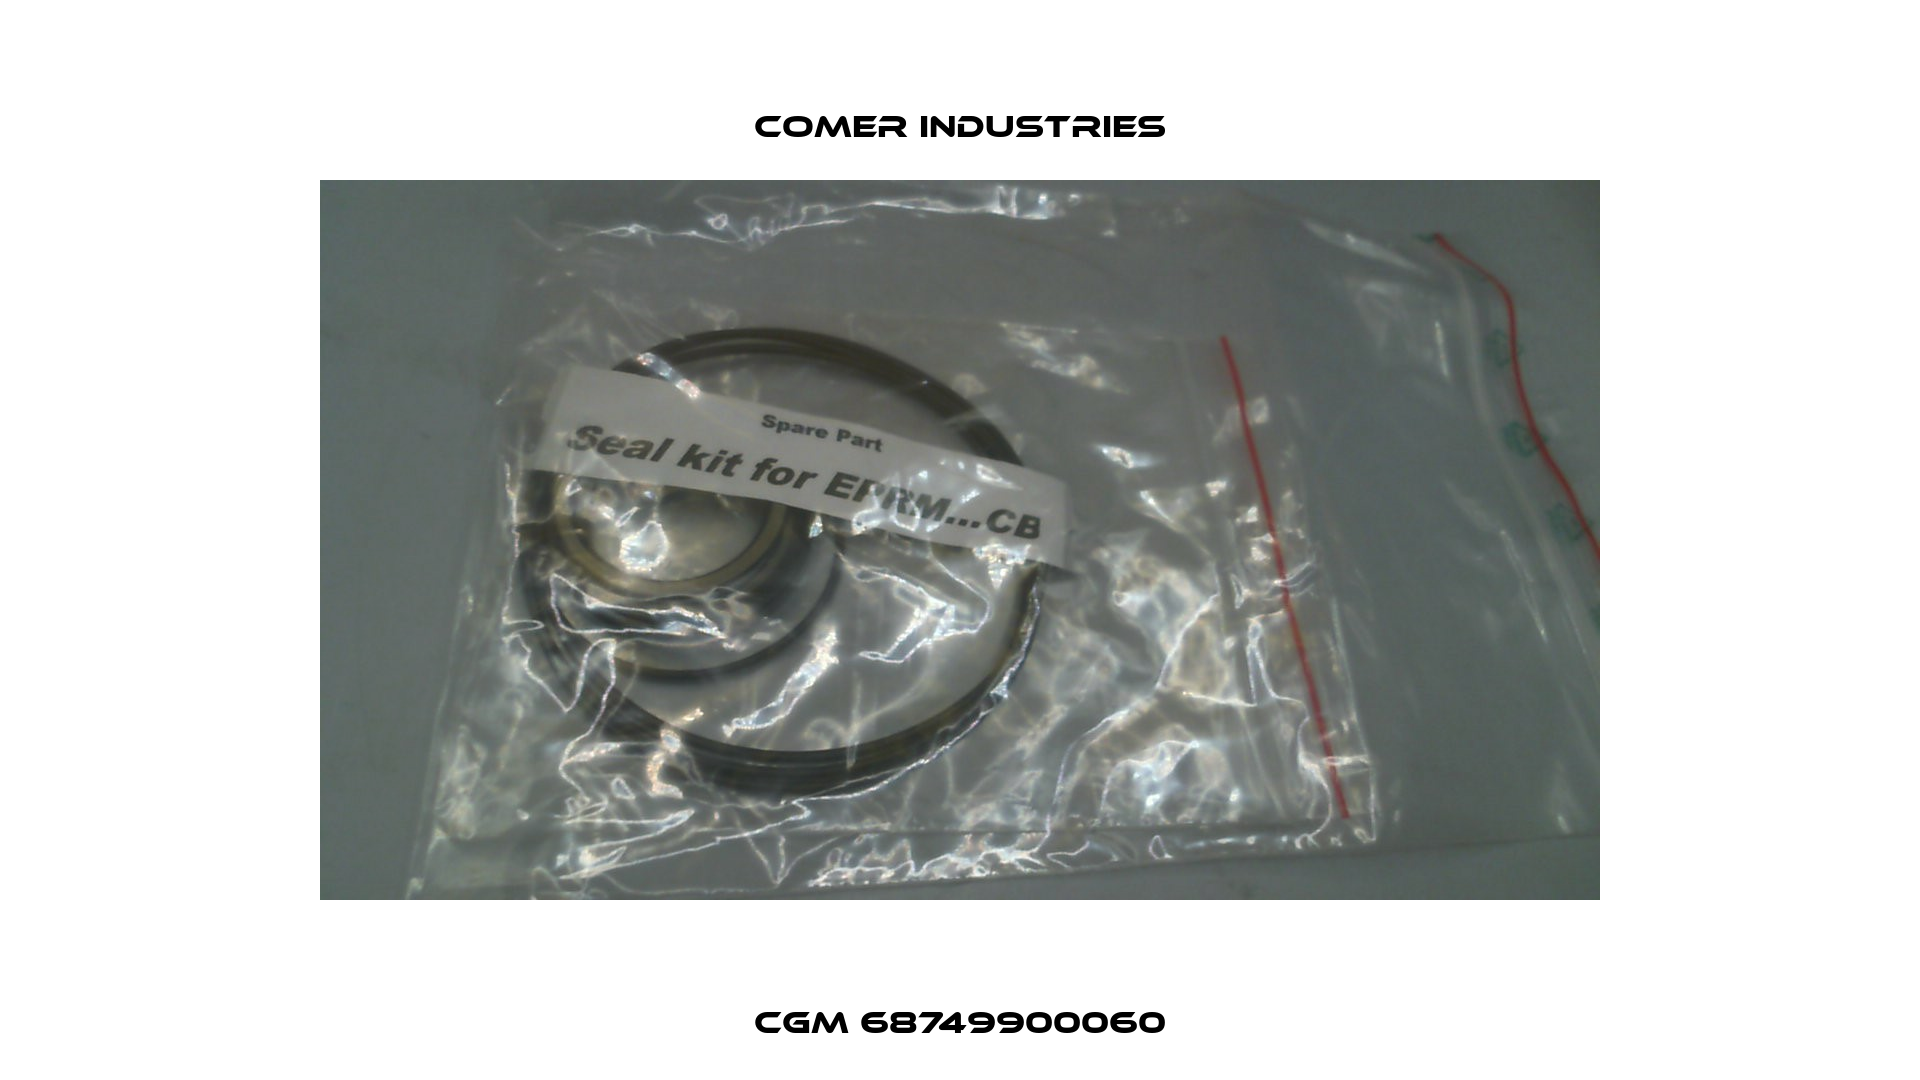 CGM 68749900060 Comer Industries